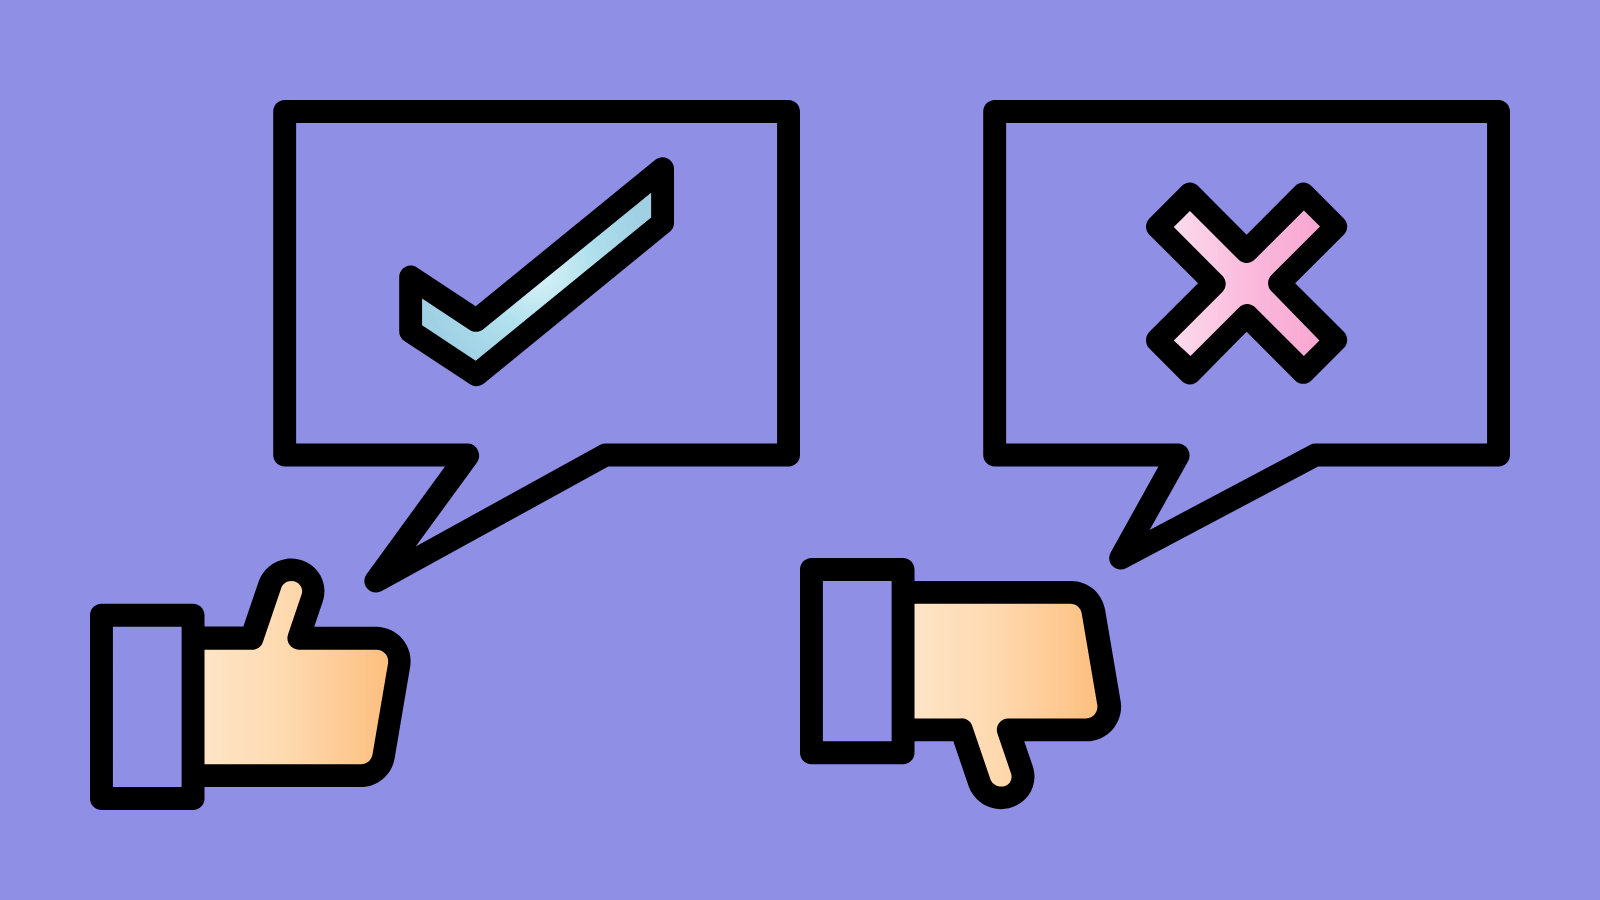 A speech bubble with a check mark pointing to a thumbs up, a speech bubble with an X pointing to a thumbs dowm